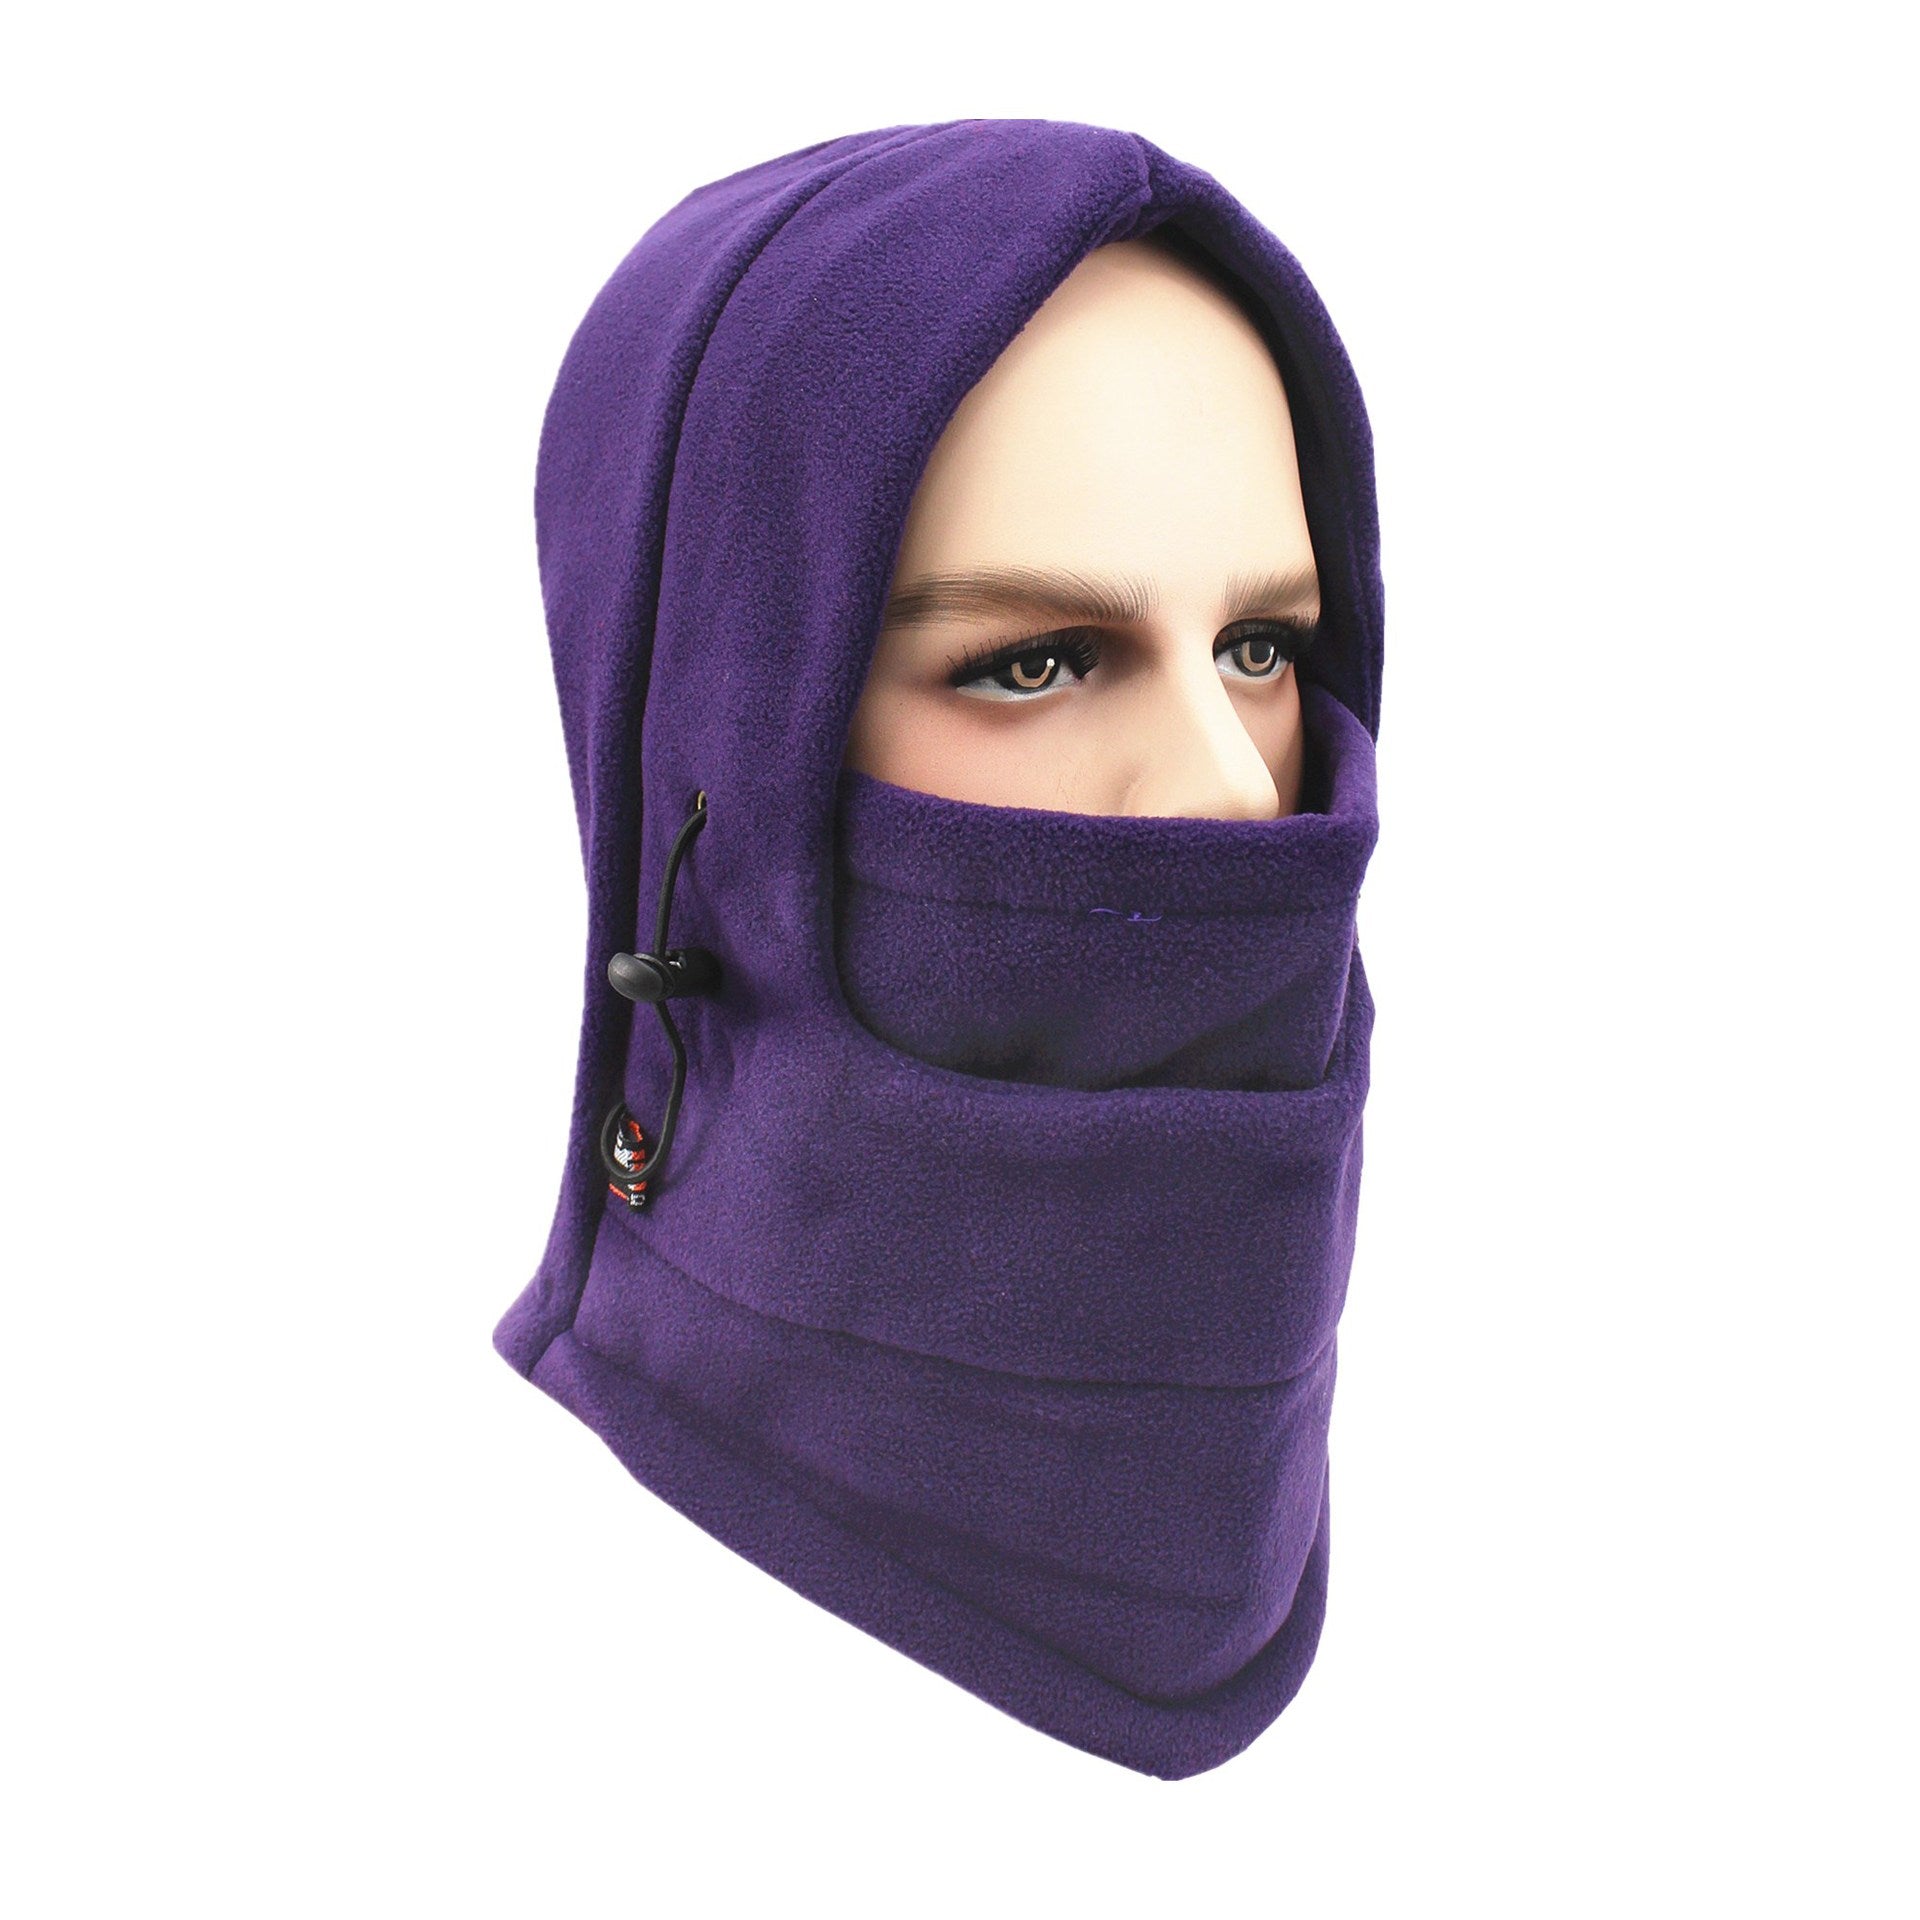 Multi-kinetic Energy Outdoor Scarf Mask In Winter - Hats -  Trend Goods